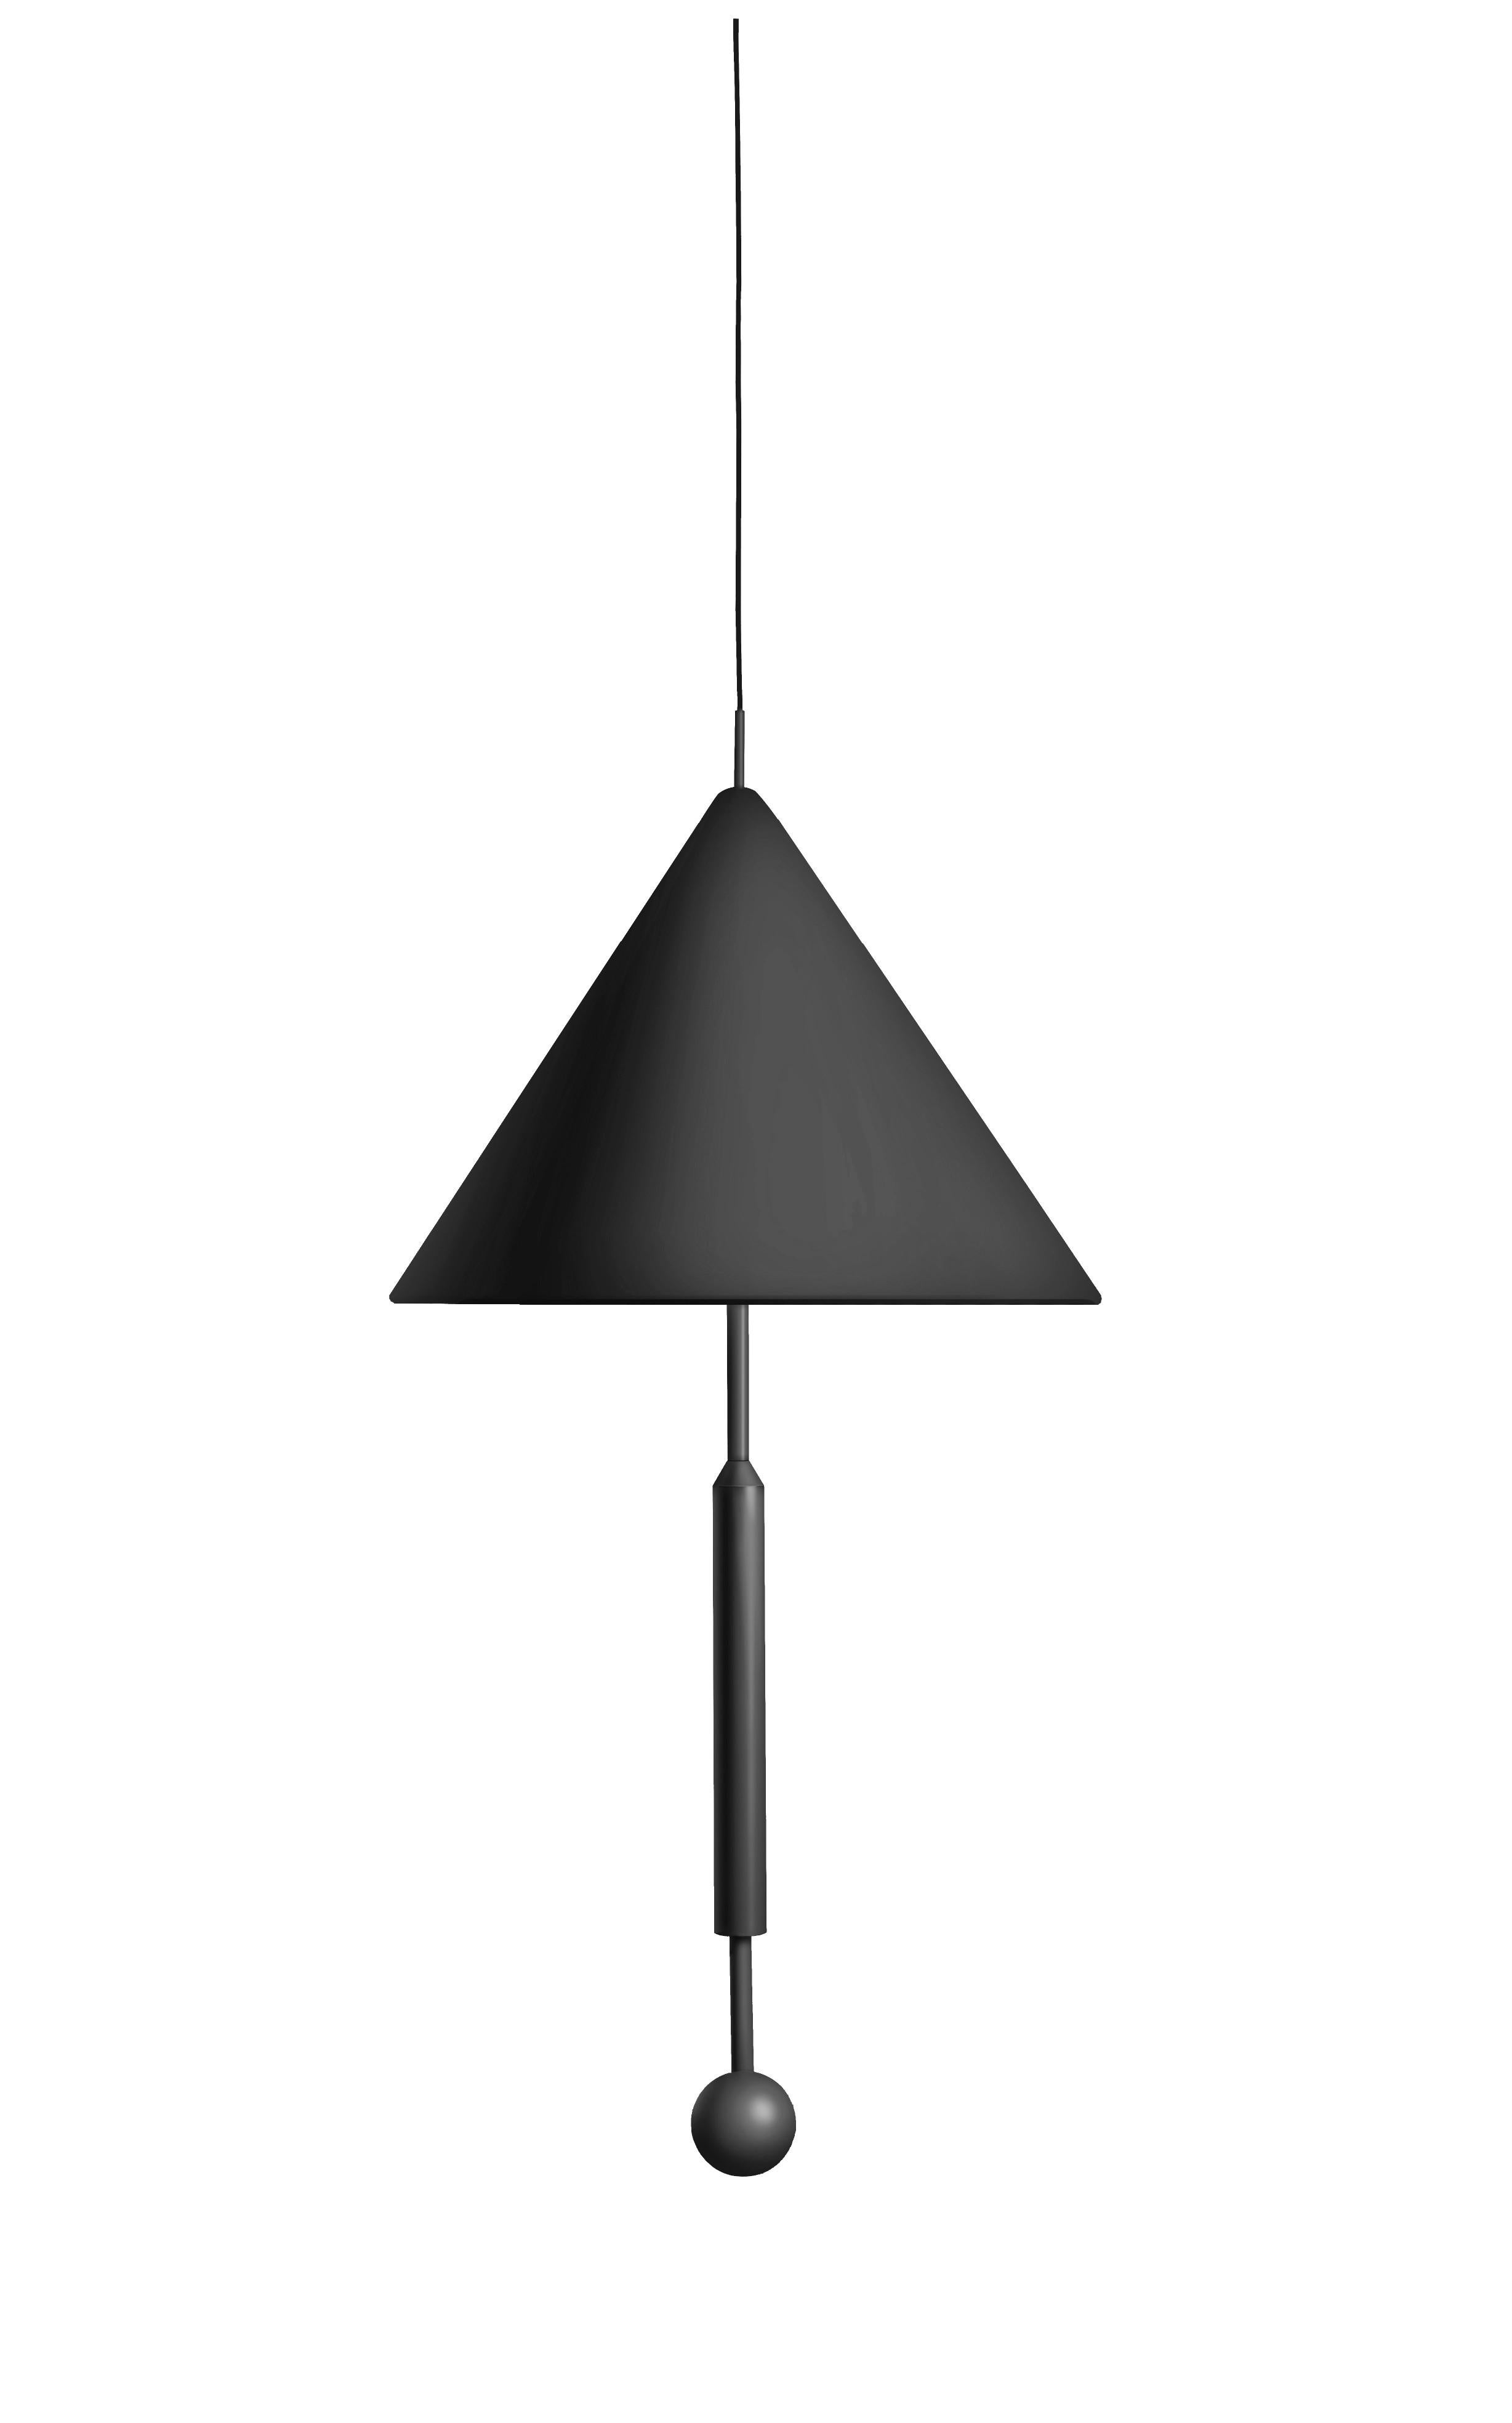 Colorful pendant lamp by Thomas Dariel, Maison Dada
Measures: Diameter 80, height 165 cm
Fabric lampshade, powder coated metal base
Monochromatic
Color cable, adjustable cable height (max 2.4m)
Available in 5 colors (Celadon, red, black, yellow